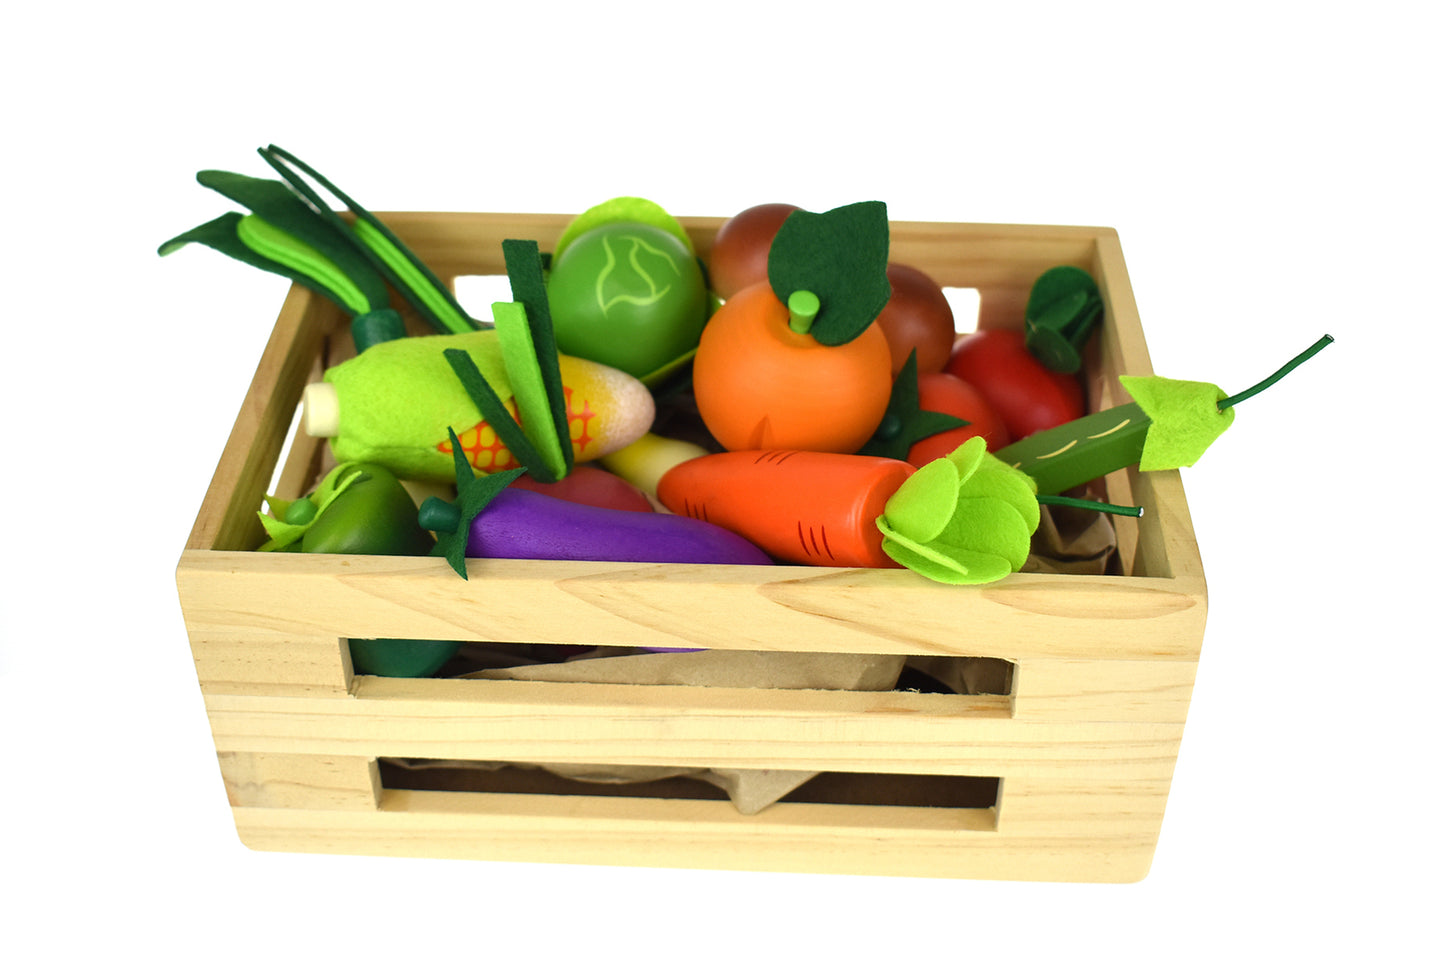 WOODEN VEGETABLES/ FRUIT 15 PCS SET WITH WOODEN CRATE